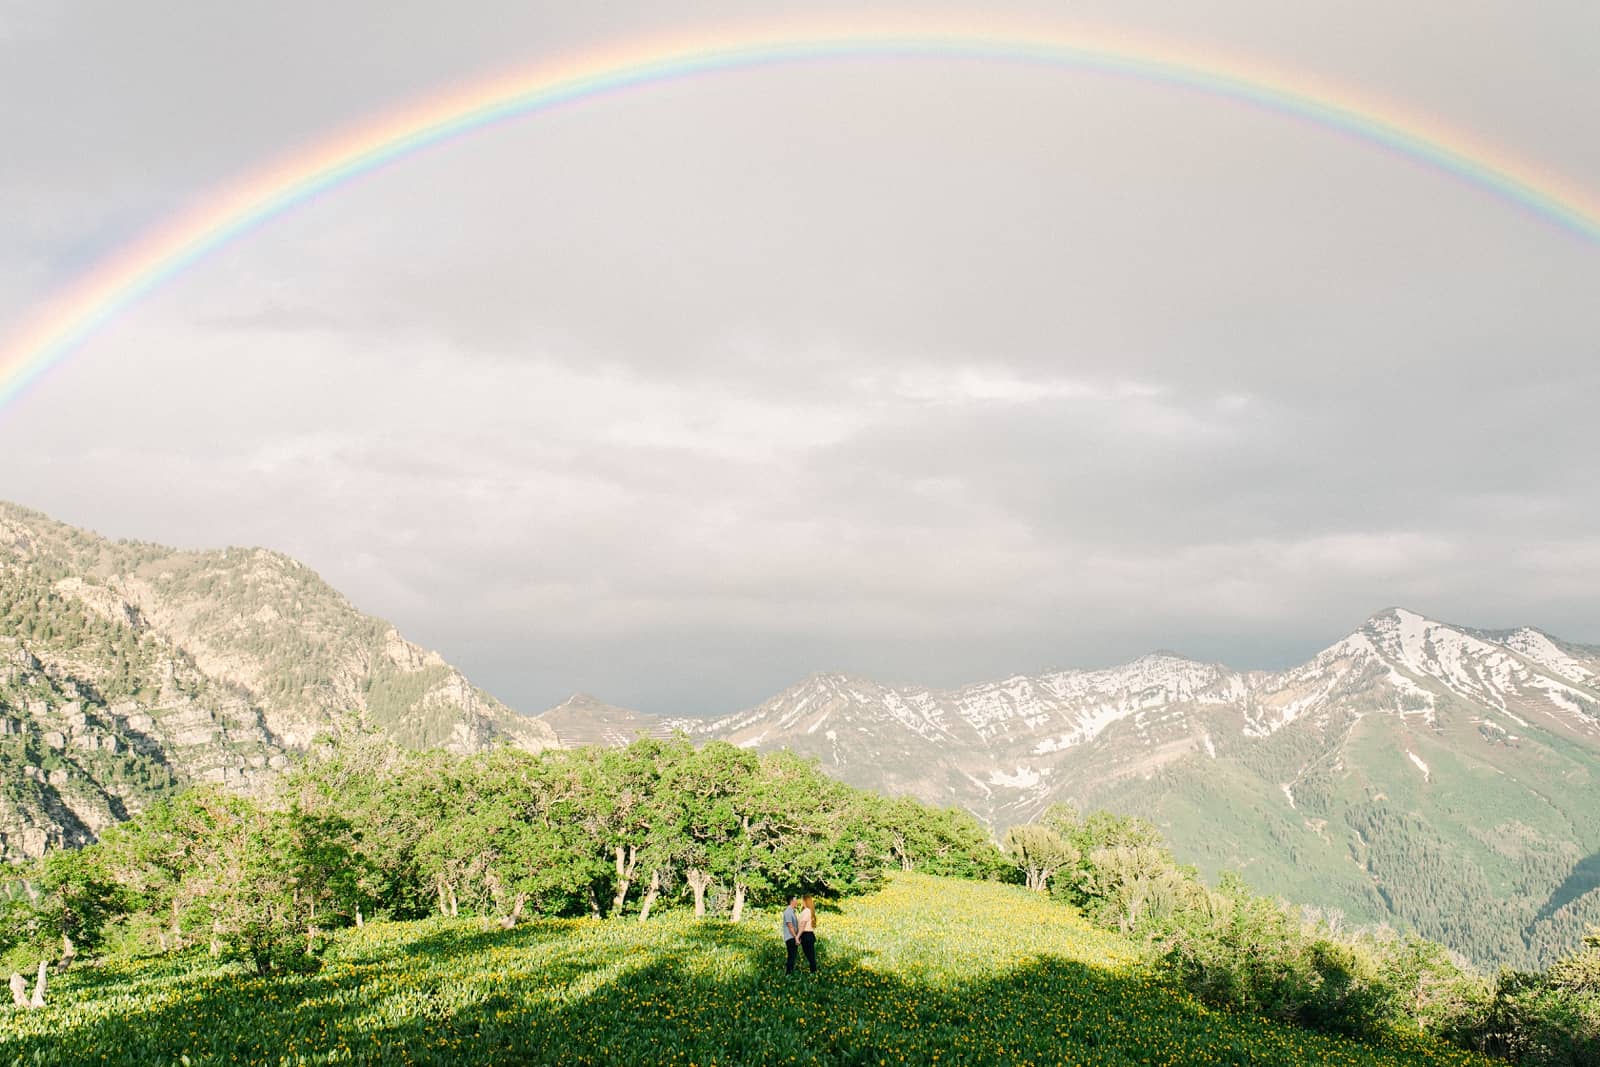 Provo Canyon wildflowers field engagement session, Utah wedding photography, engaged couple kissing in yellow flowers and mountains with rainbow in background